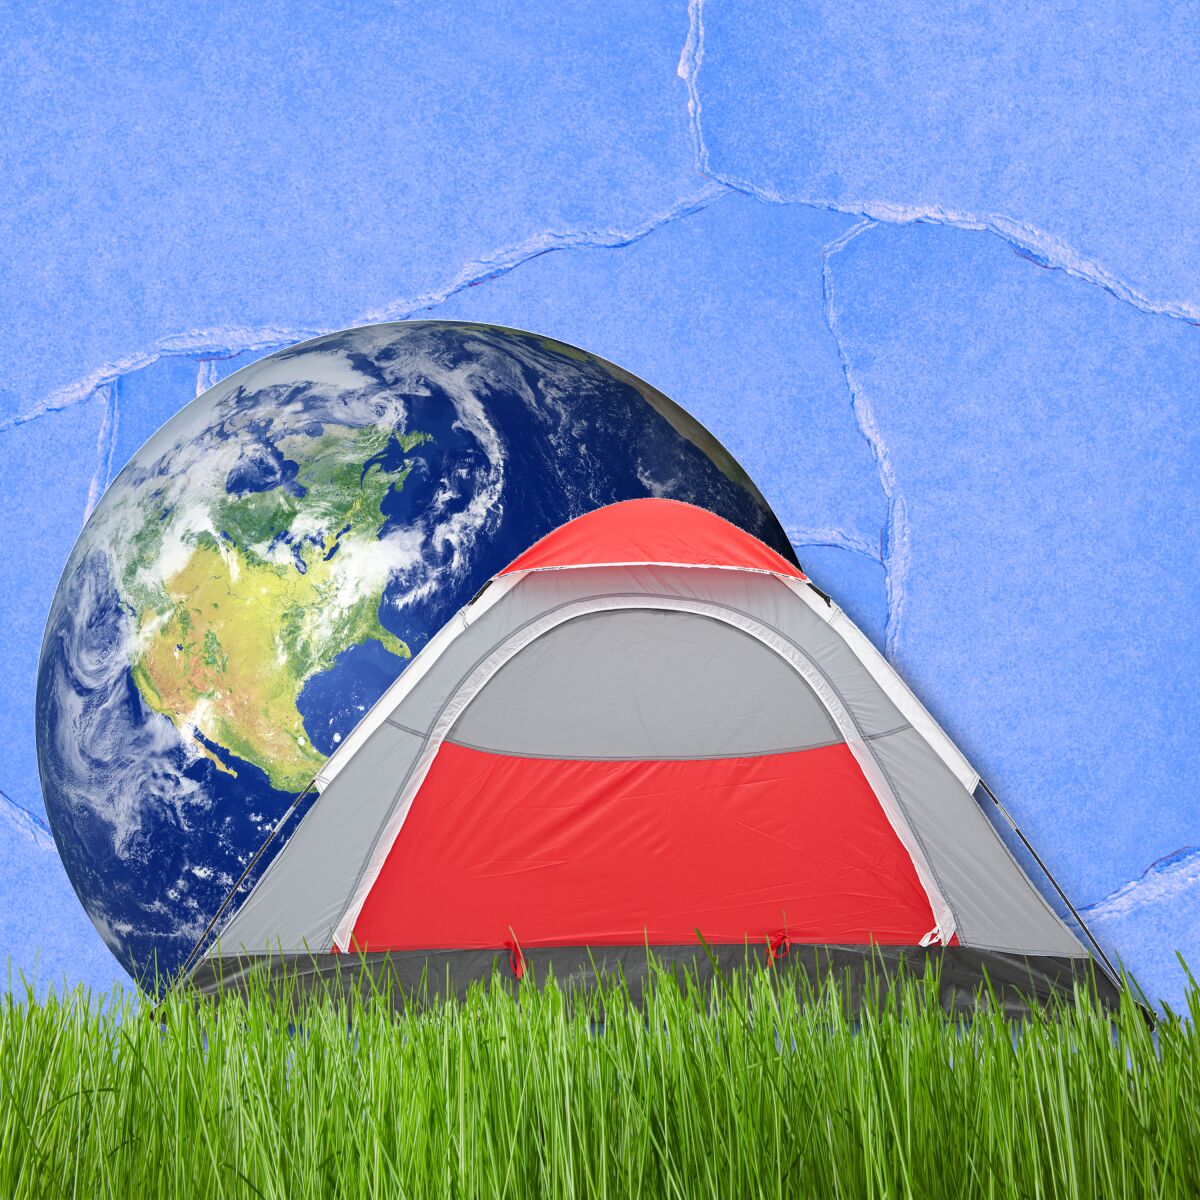 Camping tent on green grass with the globe behind it.